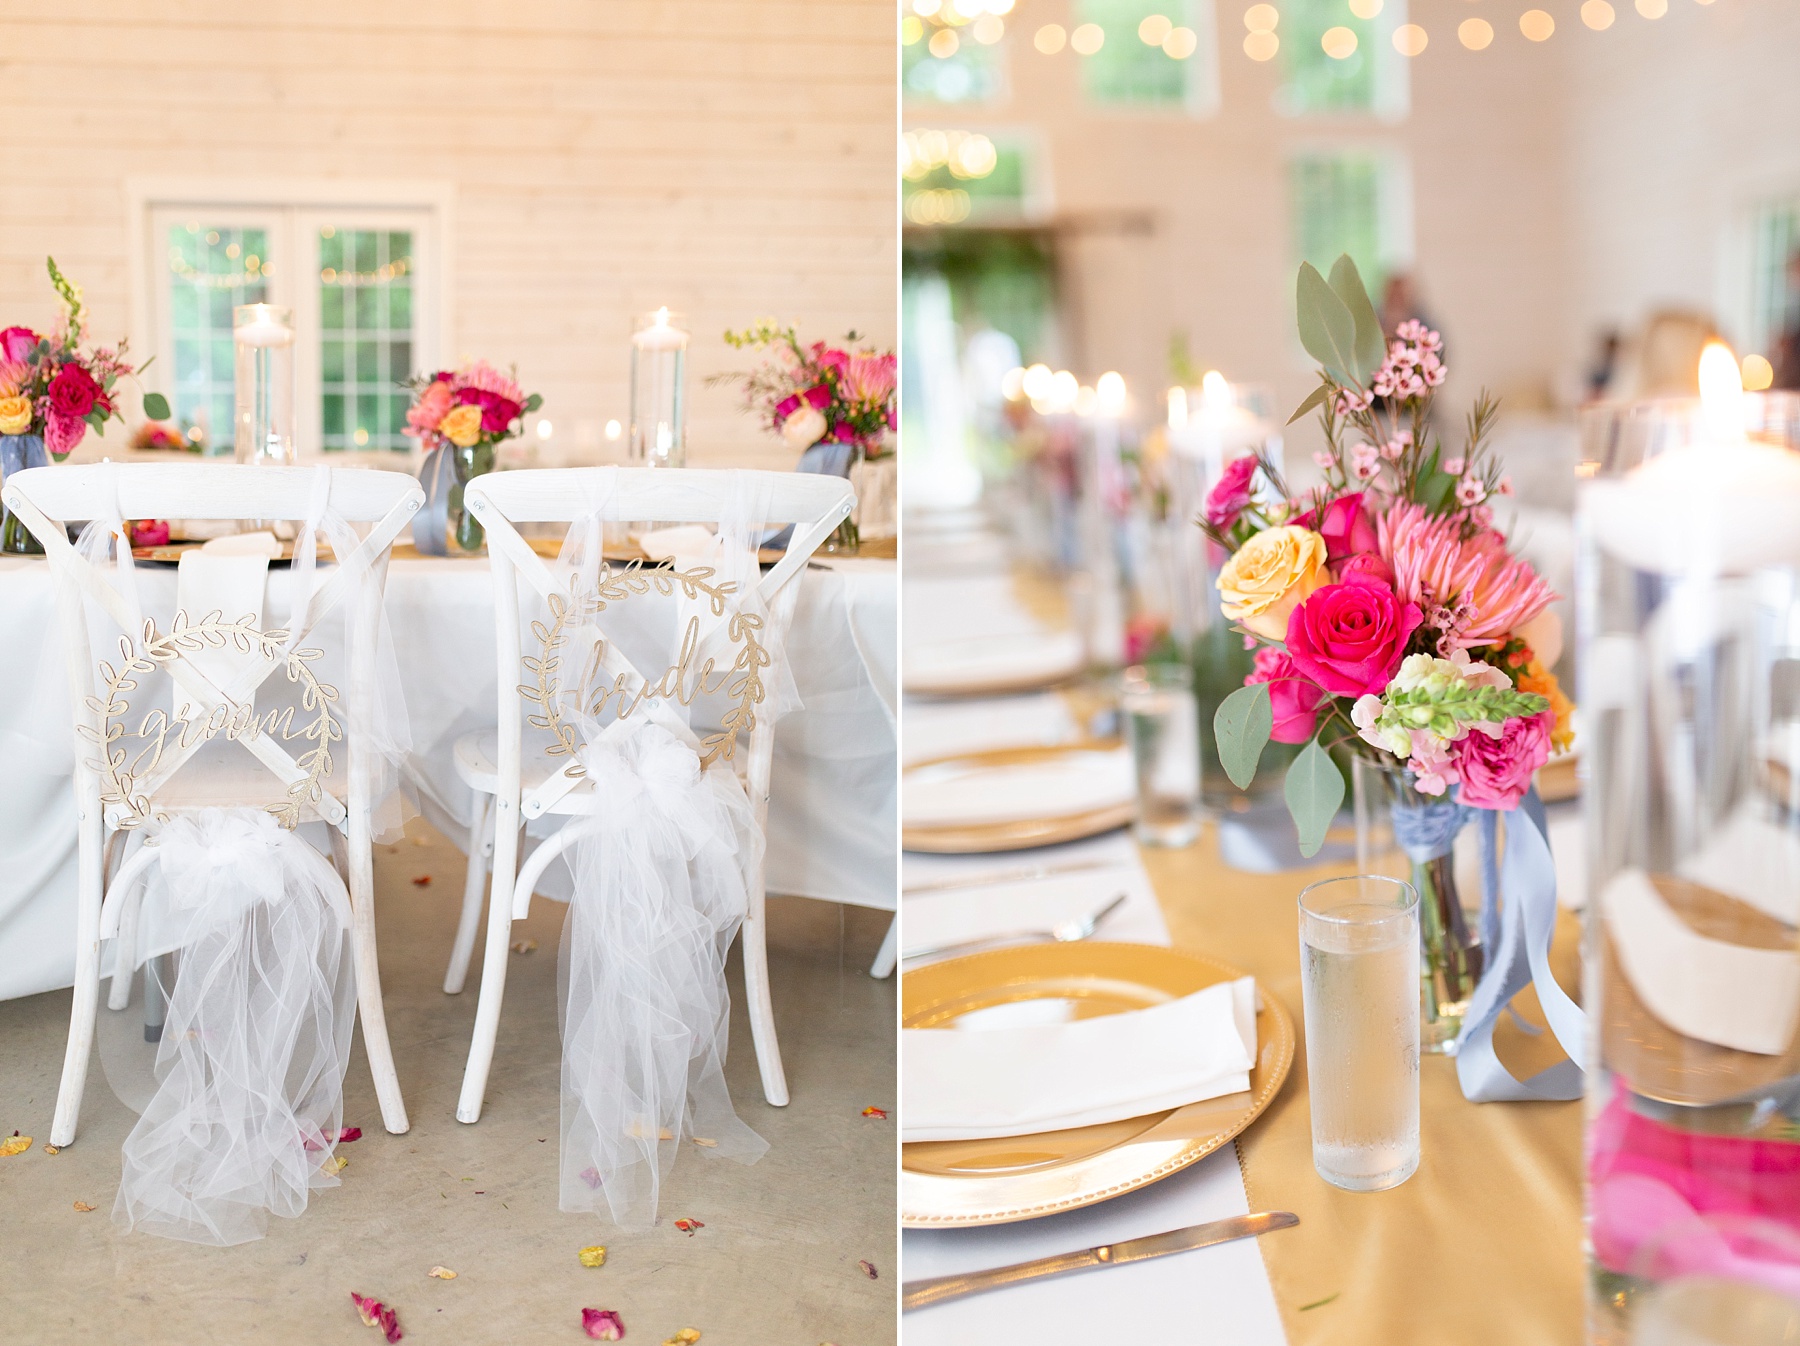 details for rustic spring wedding at the Establishment Barn photographed by Randi Michelle Weddings